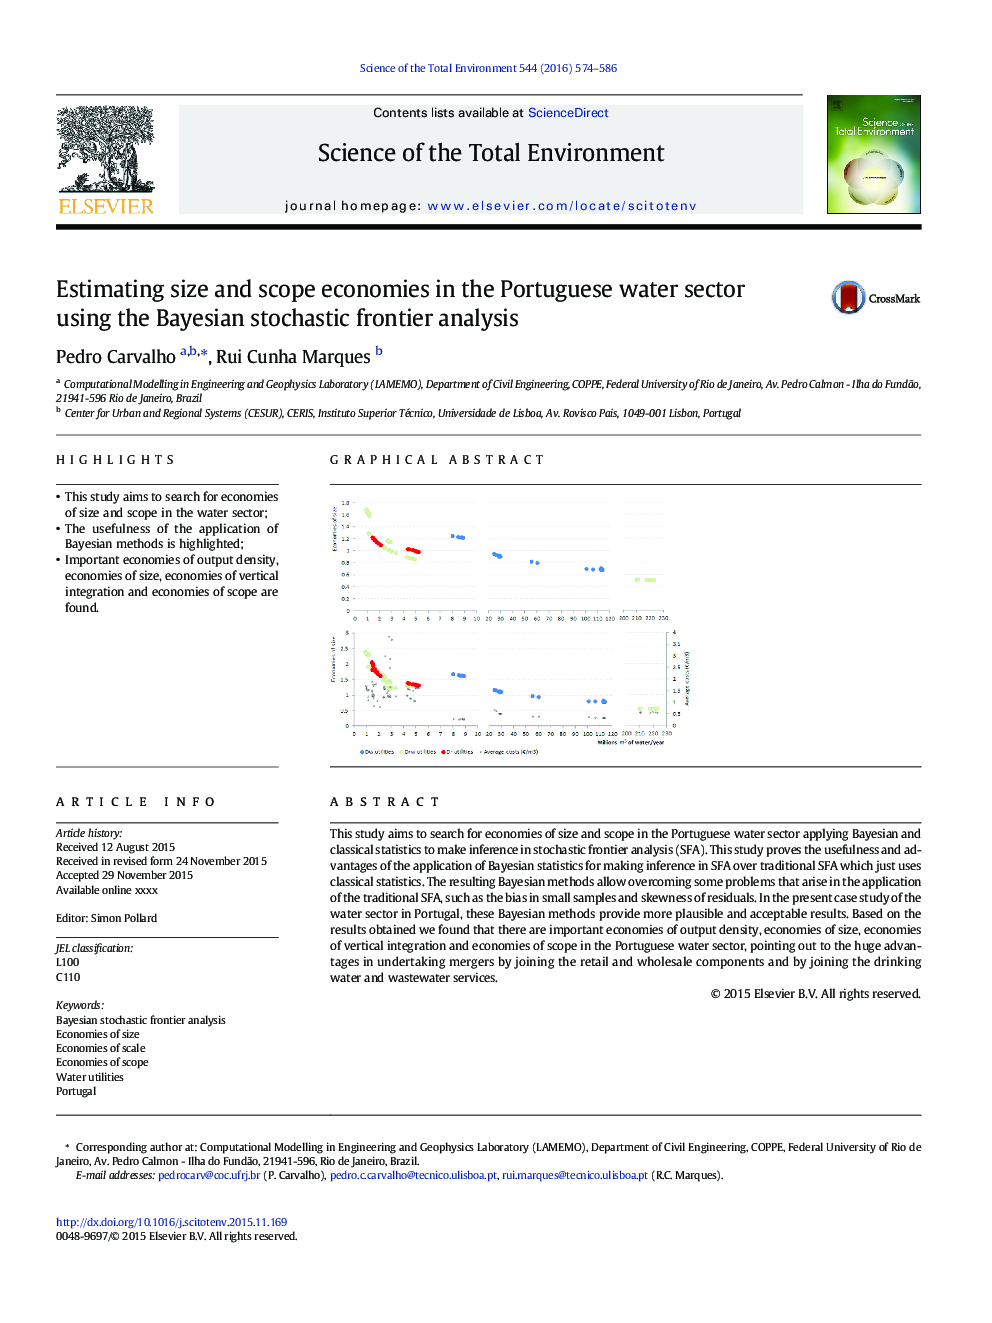 Estimating size and scope economies in the Portuguese water sector using the Bayesian stochastic frontier analysis